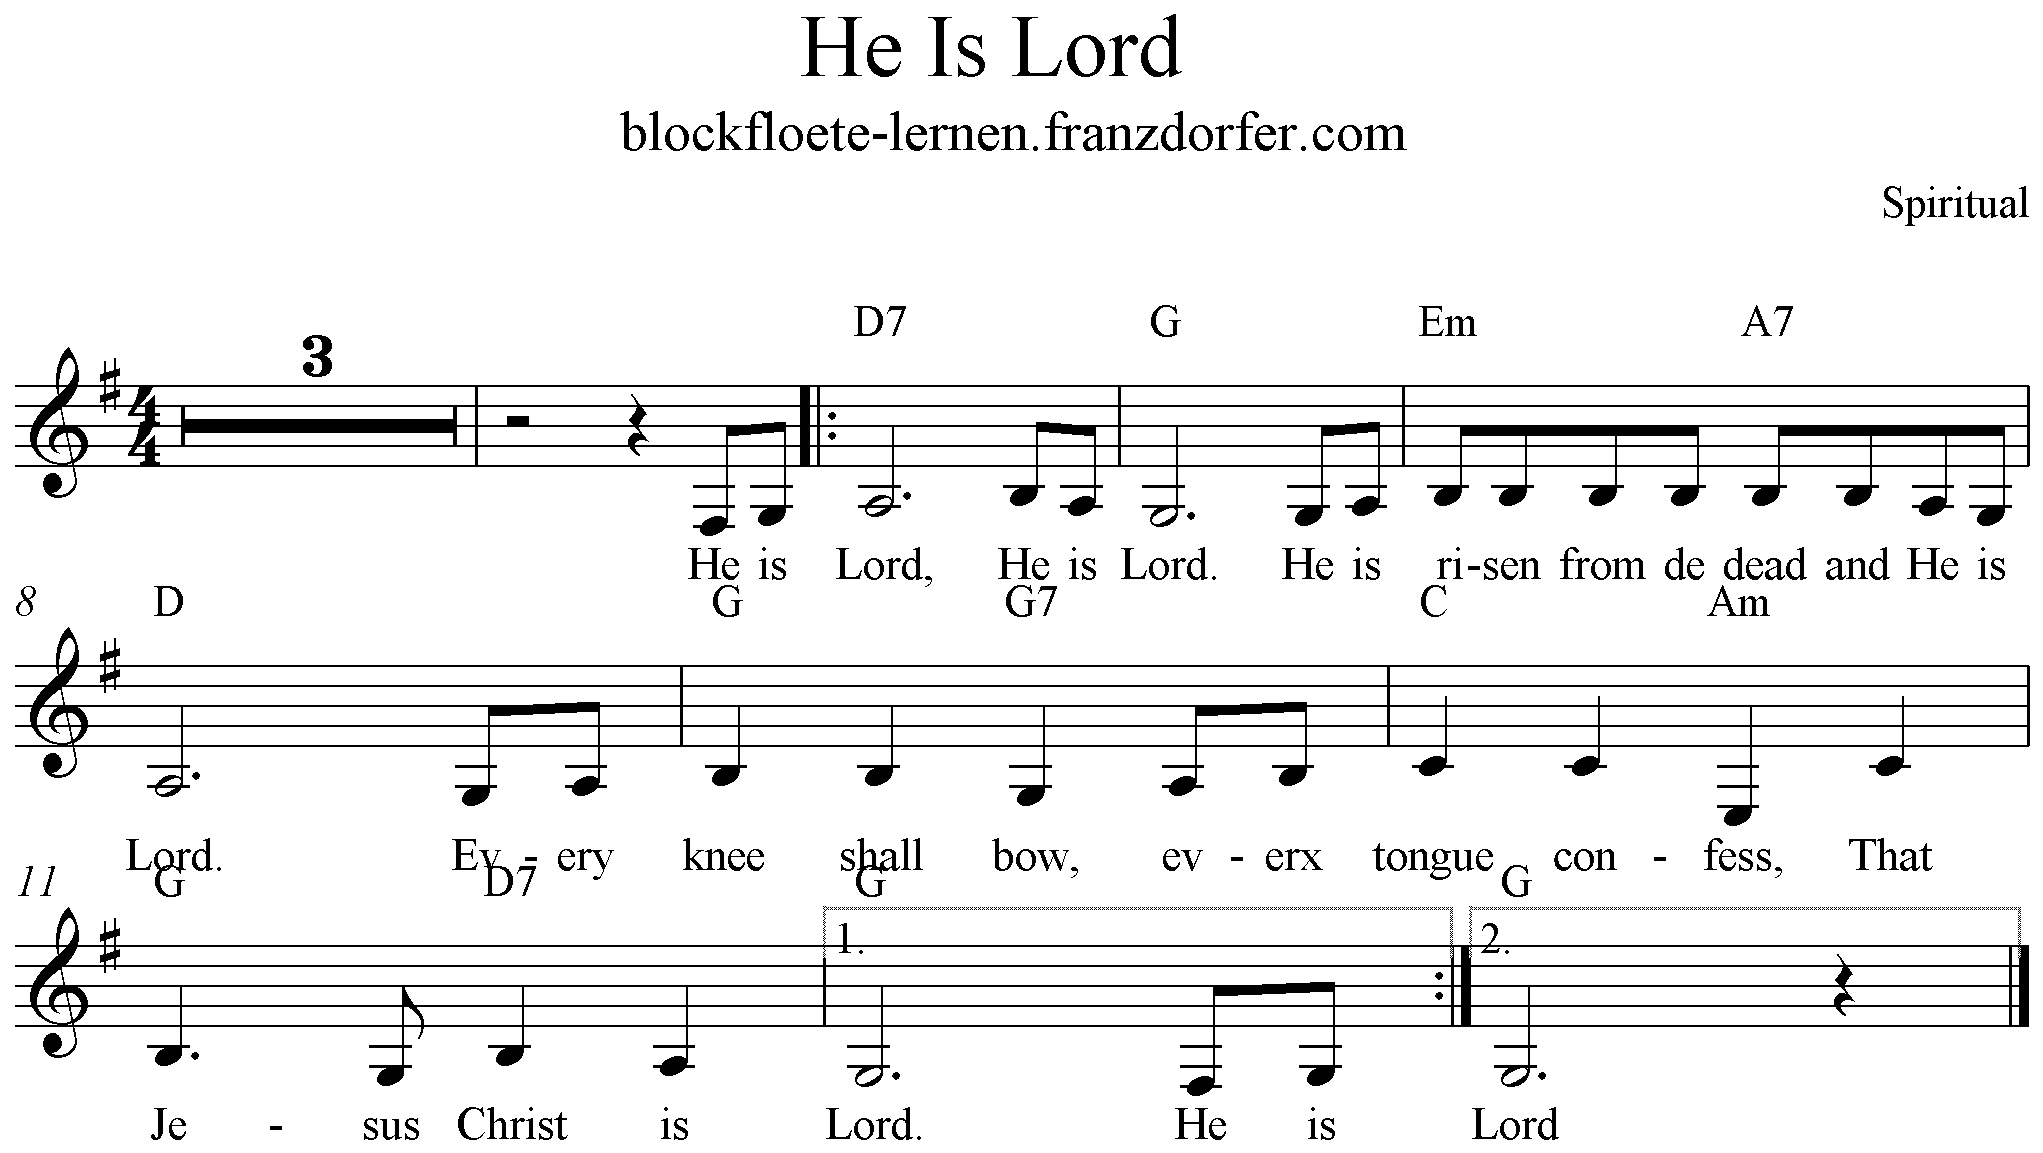 He Is Lord, G-Major low